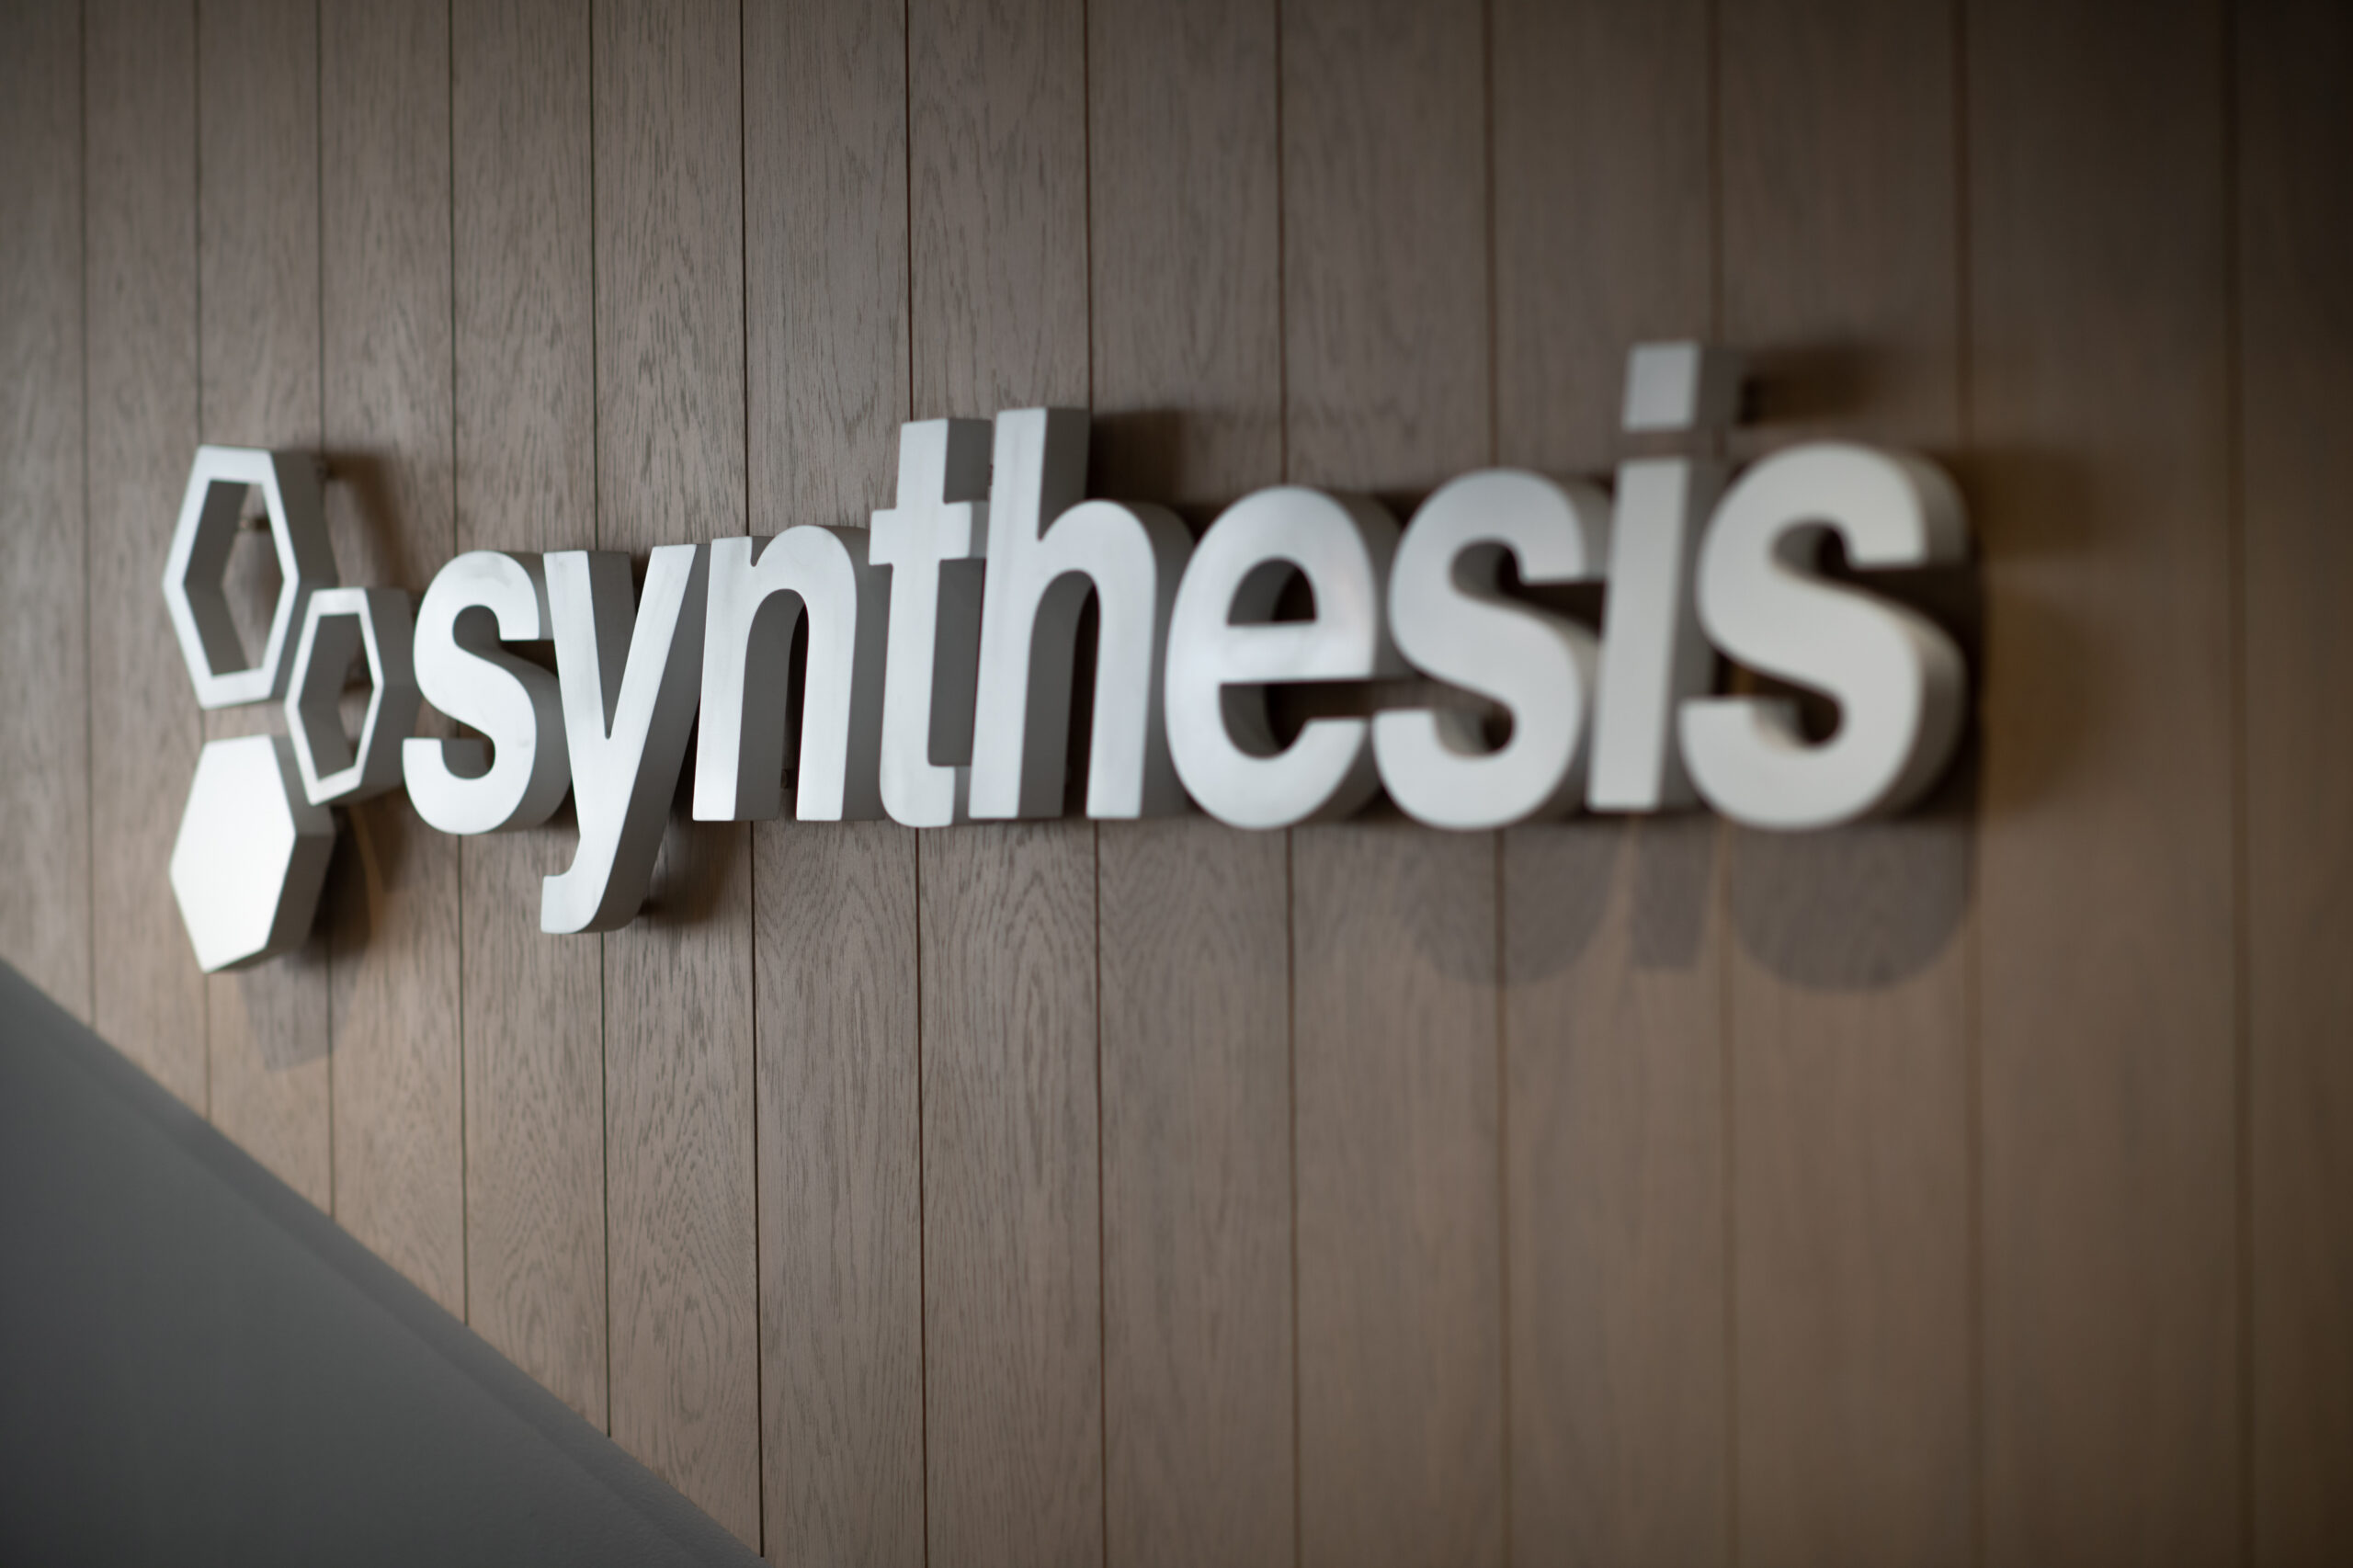 Synthesis continues its growth streak with strong annual results